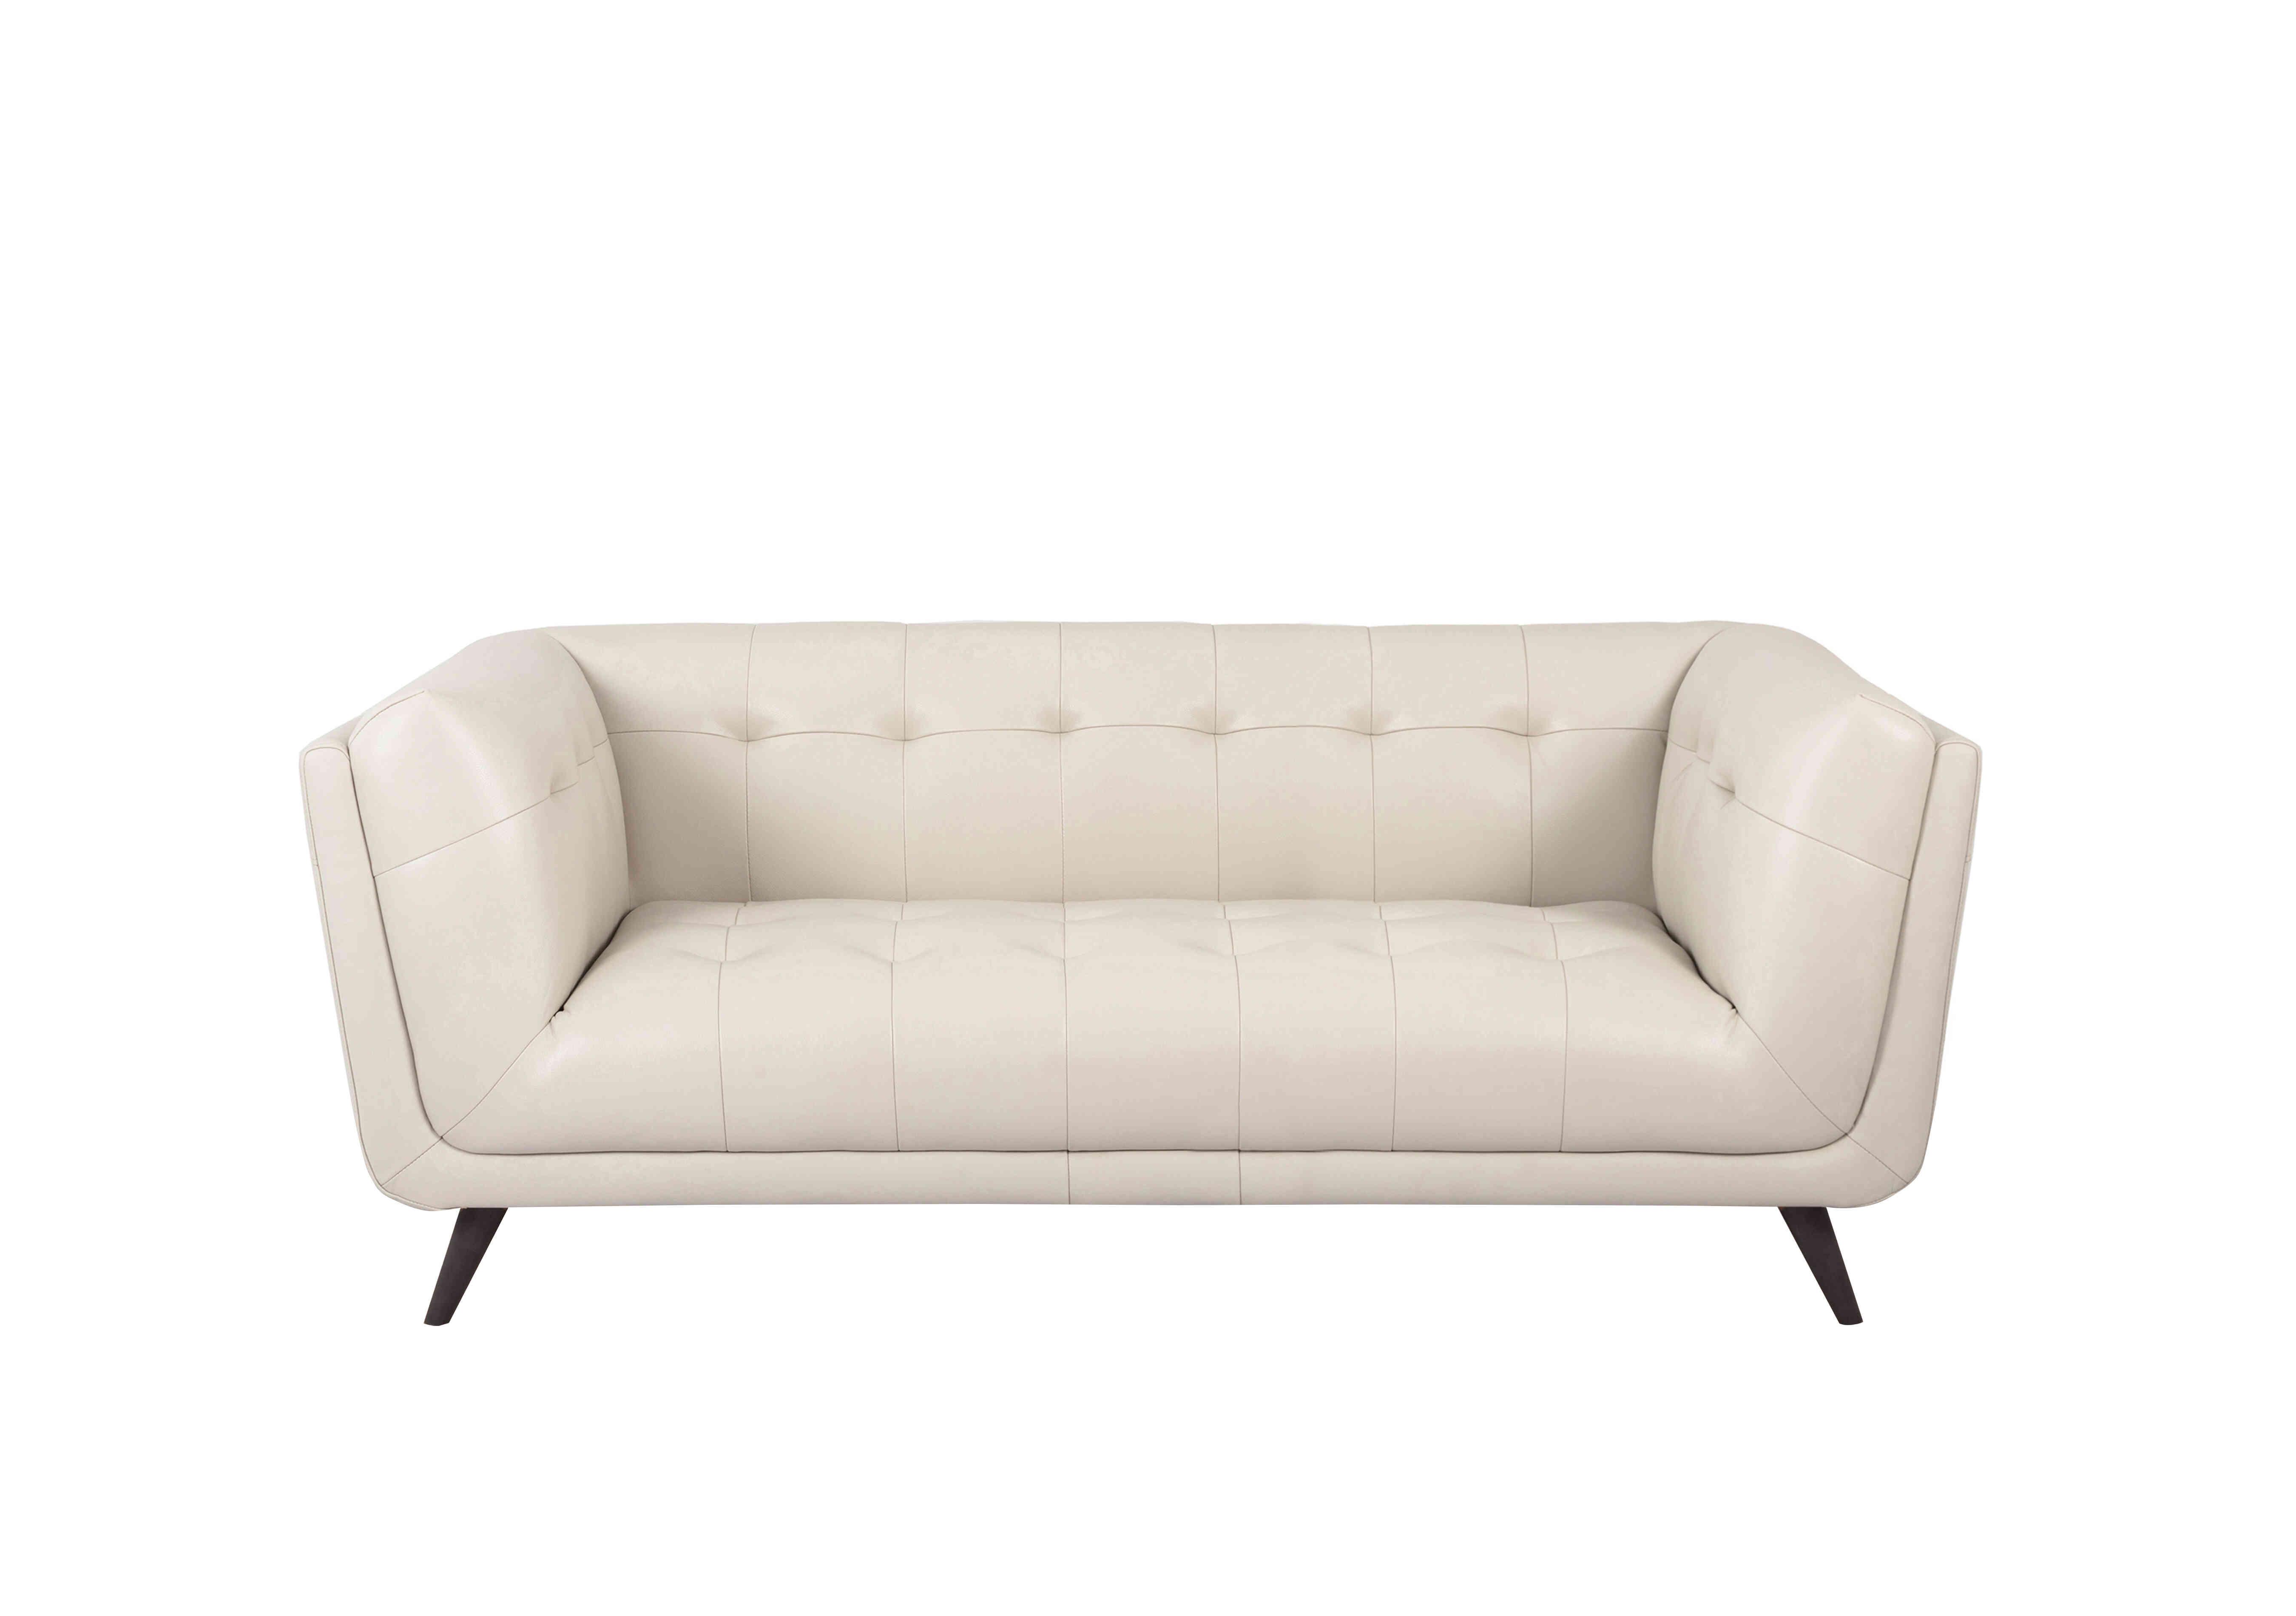 Rene Large 2 Seater Leather Sofa in Montana Cotton on Furniture Village